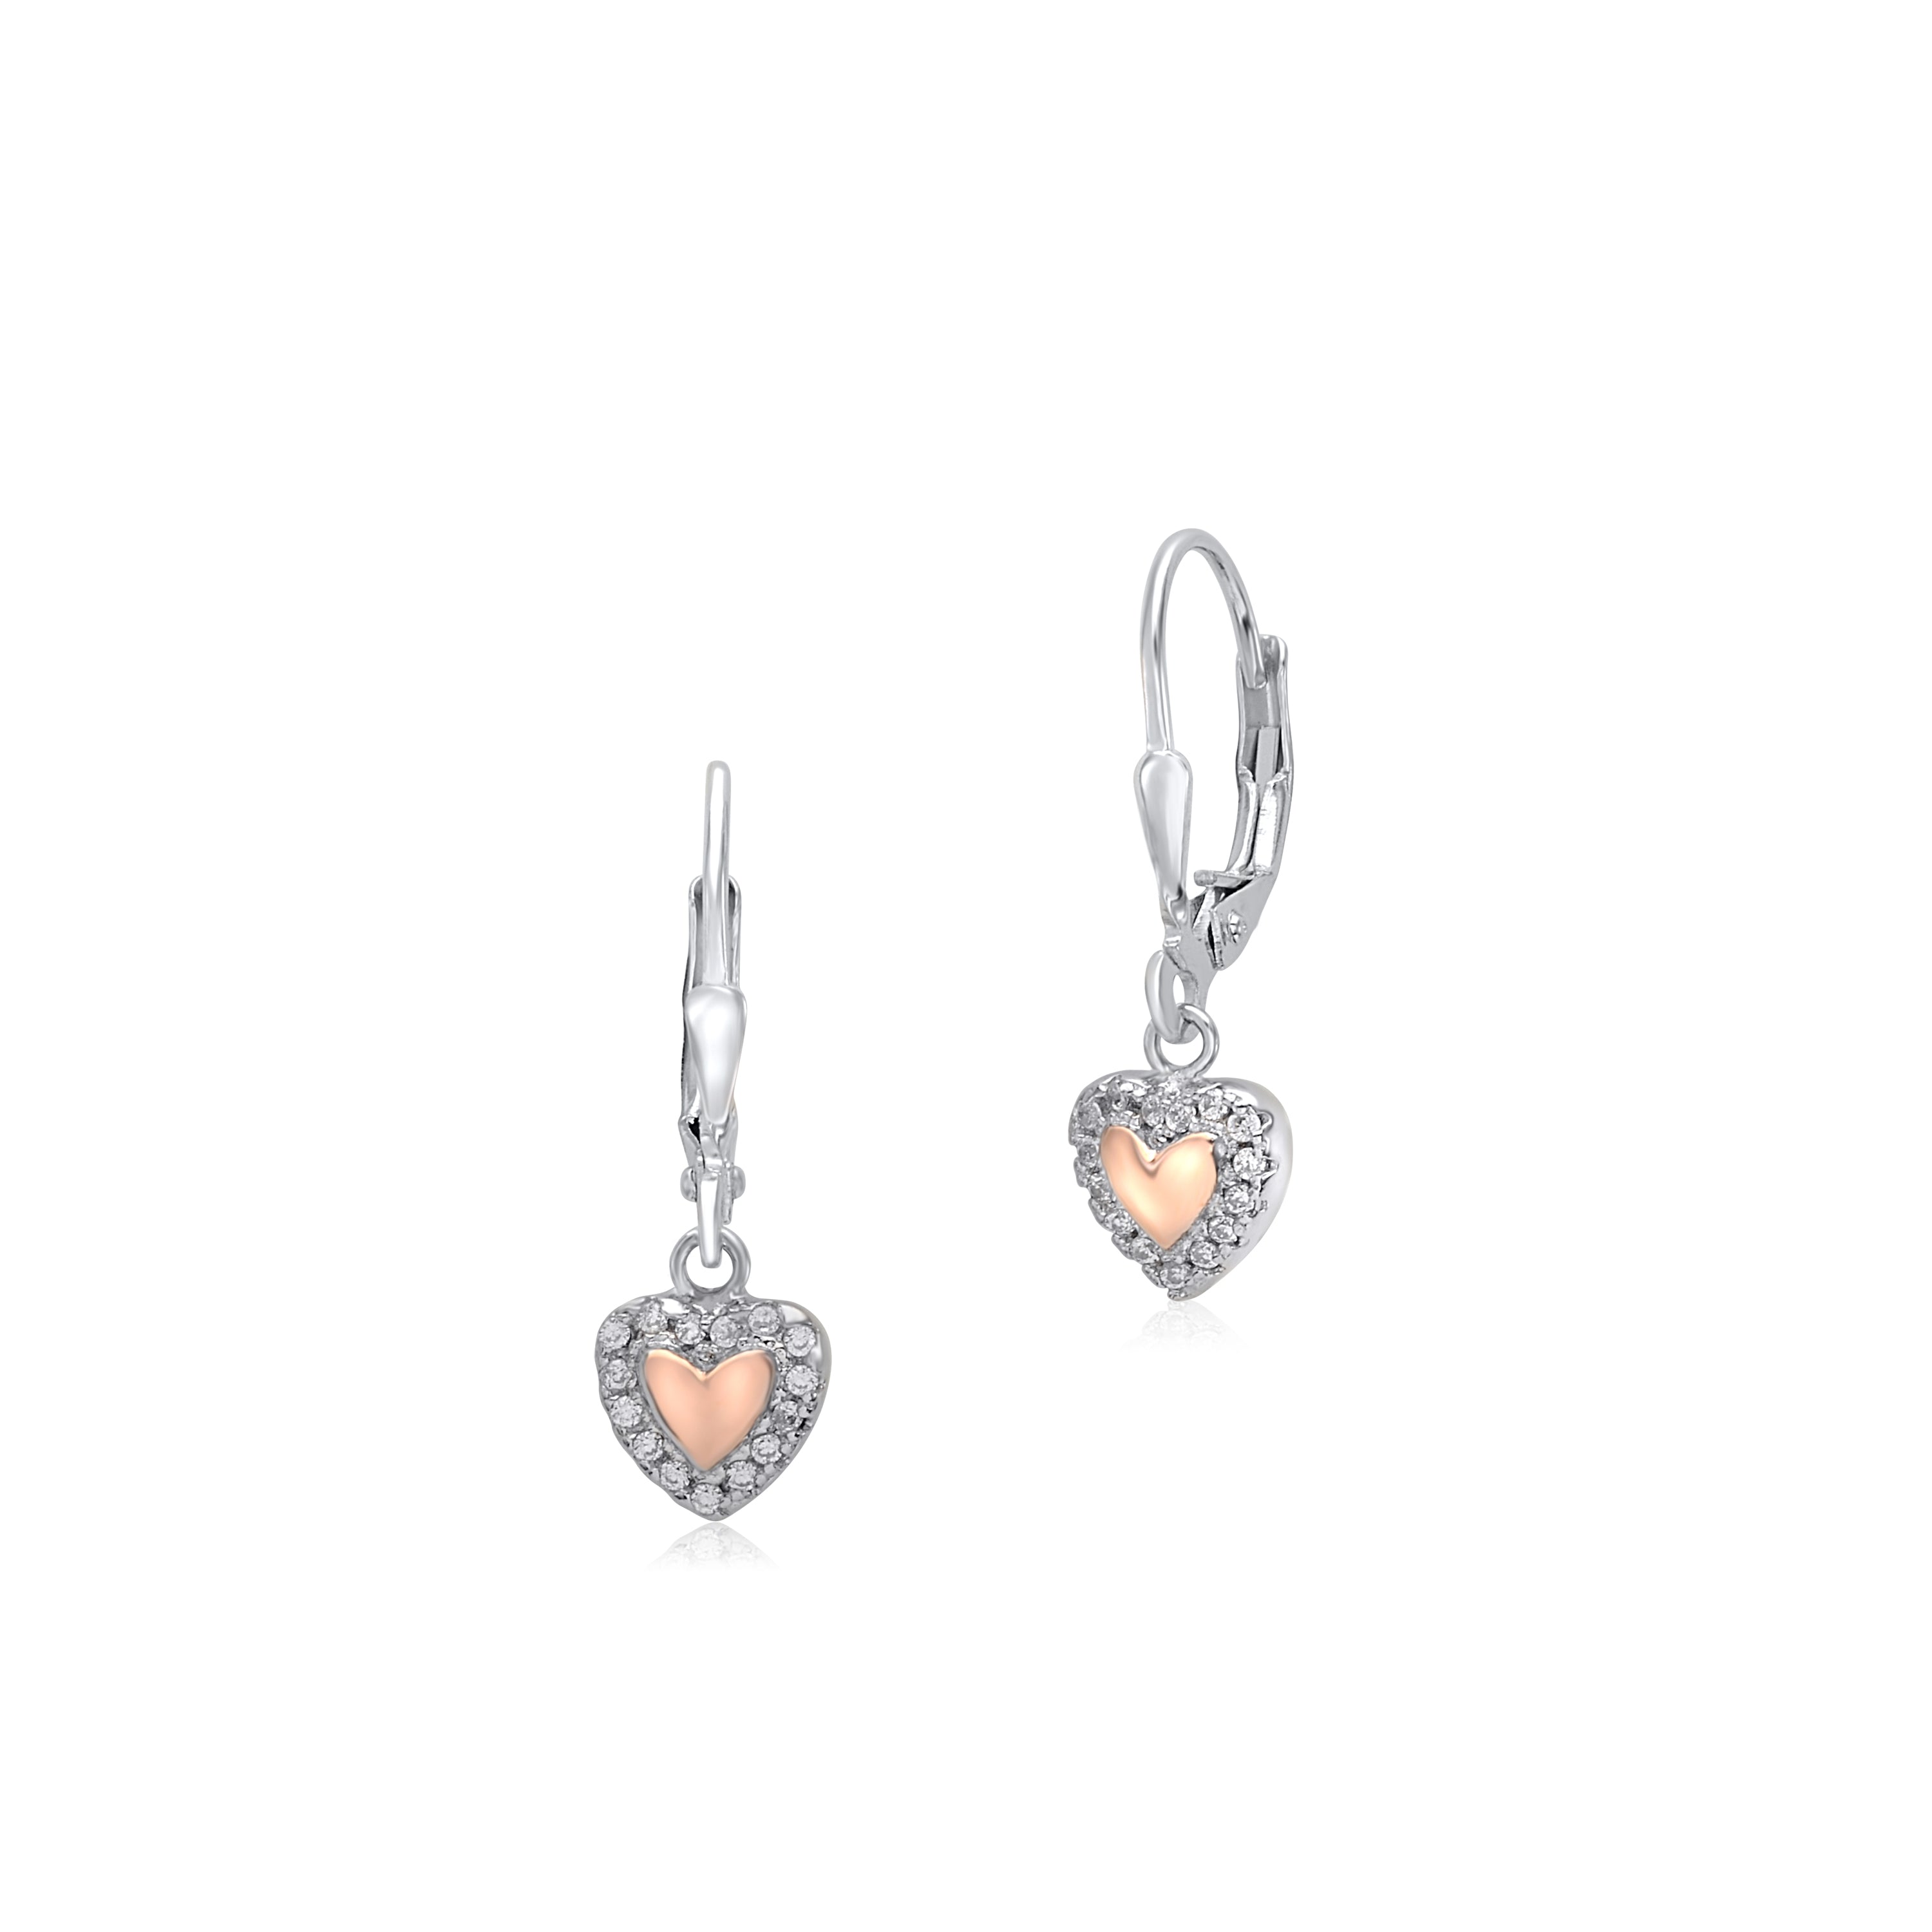 Sterling Silver 925 Heart in Heart Dangle Leverback Earrings with Pave Cubic Zirconia Italy